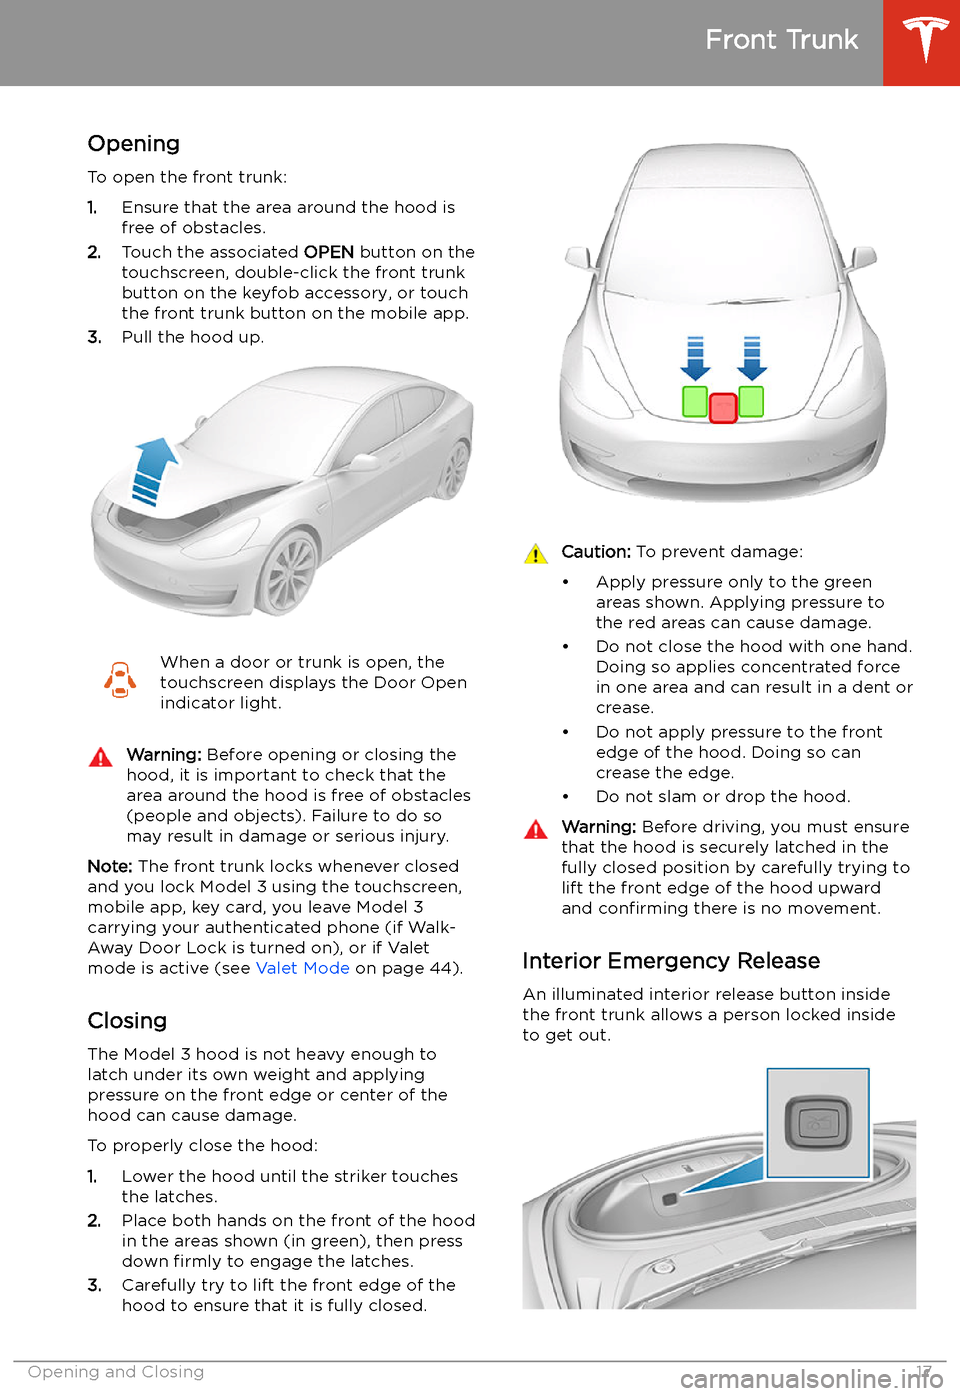 TESLA MODEL 3 2019   (Europe) User Guide Front Trunk
Opening
To open the front trunk:
1. Ensure that the area around the hood is
free of obstacles.
2. Touch the associated  OPEN button on the
touchscreen, double-click the front trunk
button 